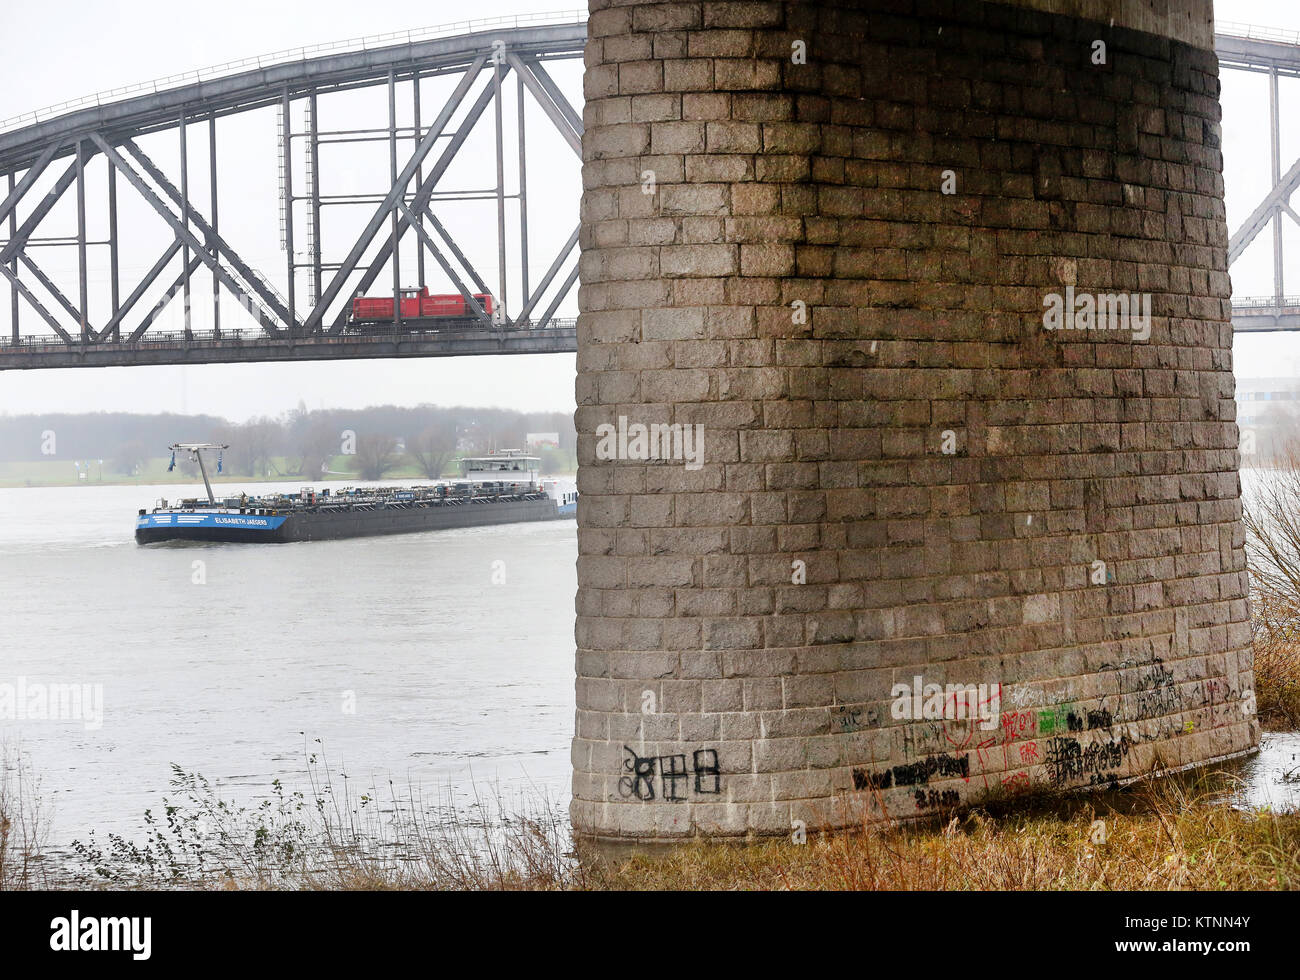 Duisburg, Germany. 27th Dec, 2017. A ship floats under the bridge of the A42 road near Duisburg, Germany, 27 December 2017. An excursion ship crashed into one of the bridge's pillars yesterday in the evening. Credit: Roland Weihrauch/dpa/Alamy Live News Stock Photo